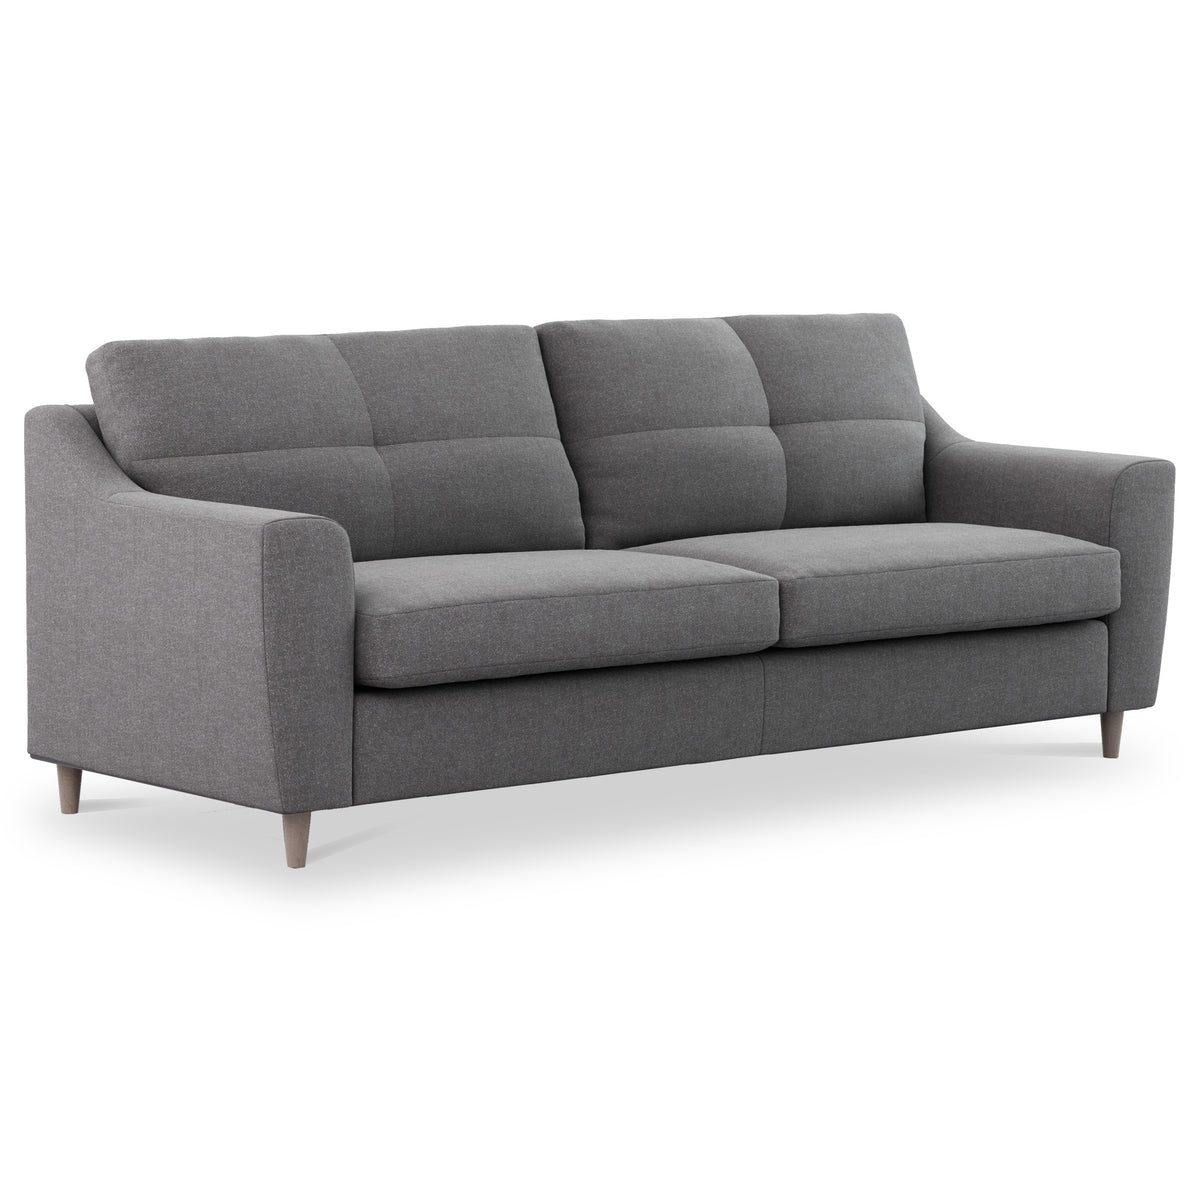 Justin 4 Seater Sofa from Roseland Furniture